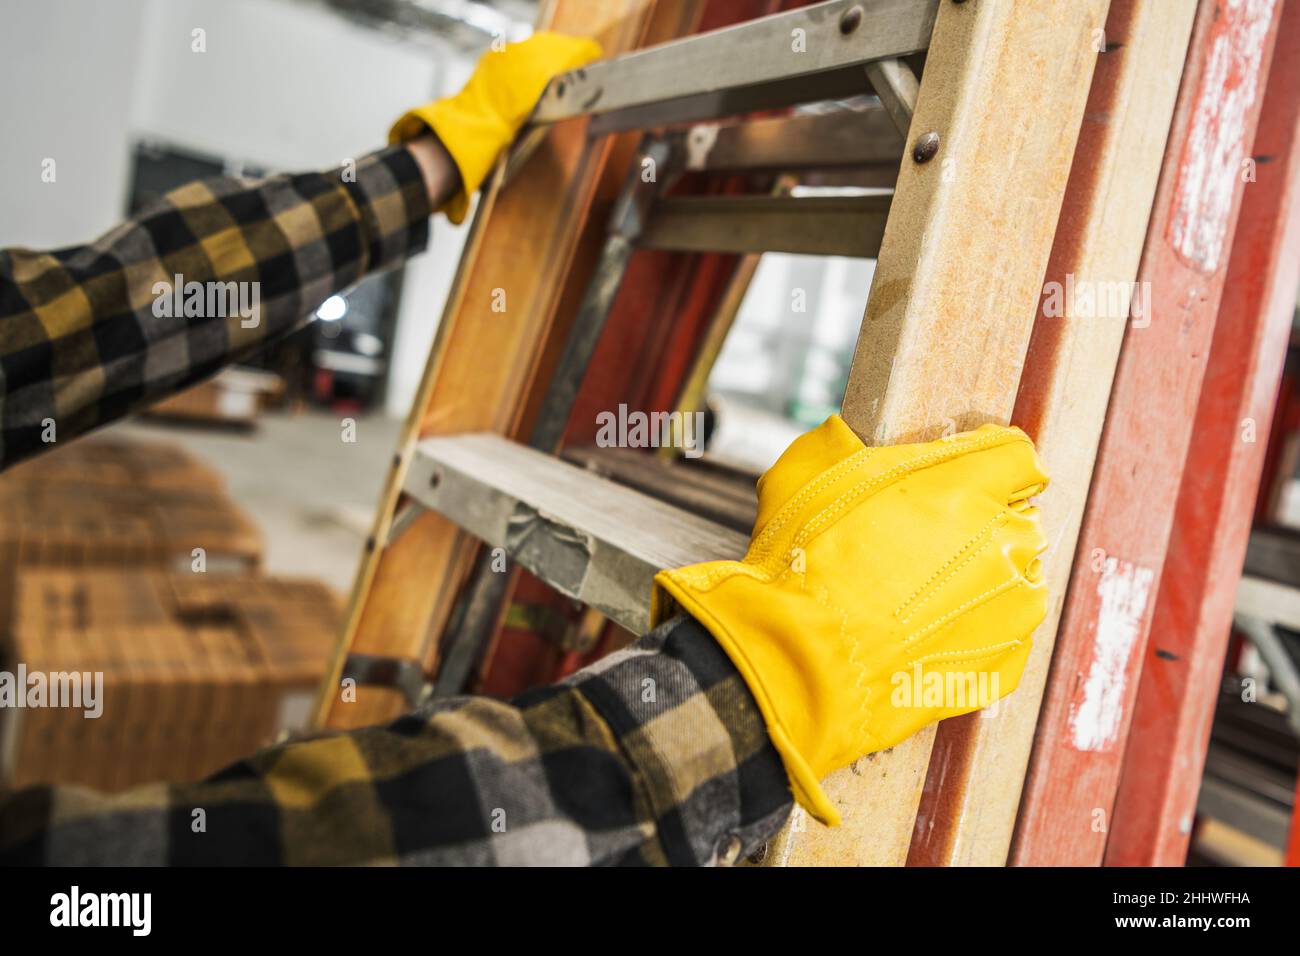 Construction Worker Wearing Safety Gloves Moving Commercial Grade Ladders Within Construction Site. Stock Photo